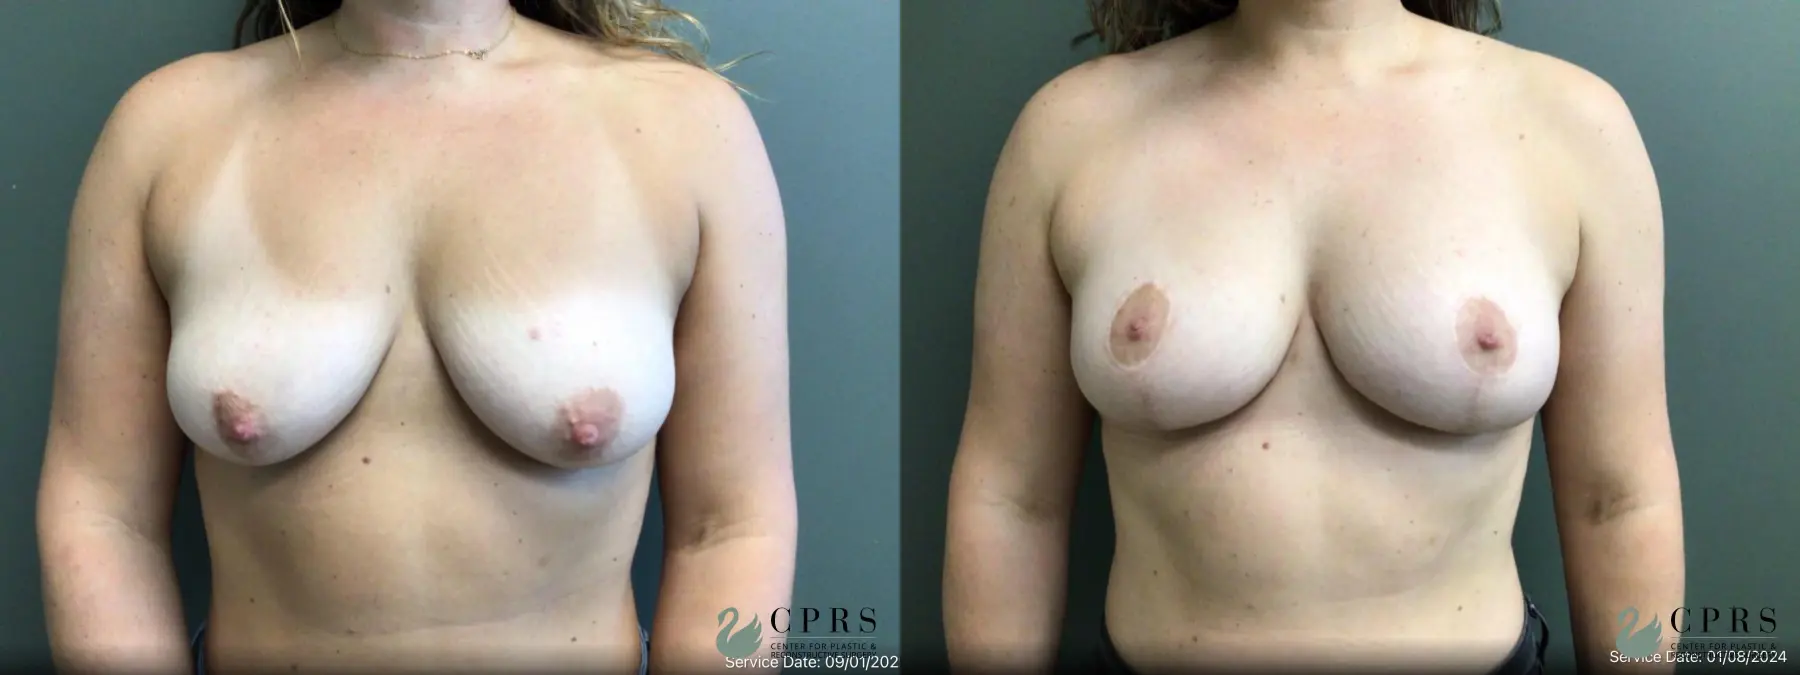 Breast Lift: Patient 8 - Before and After 1